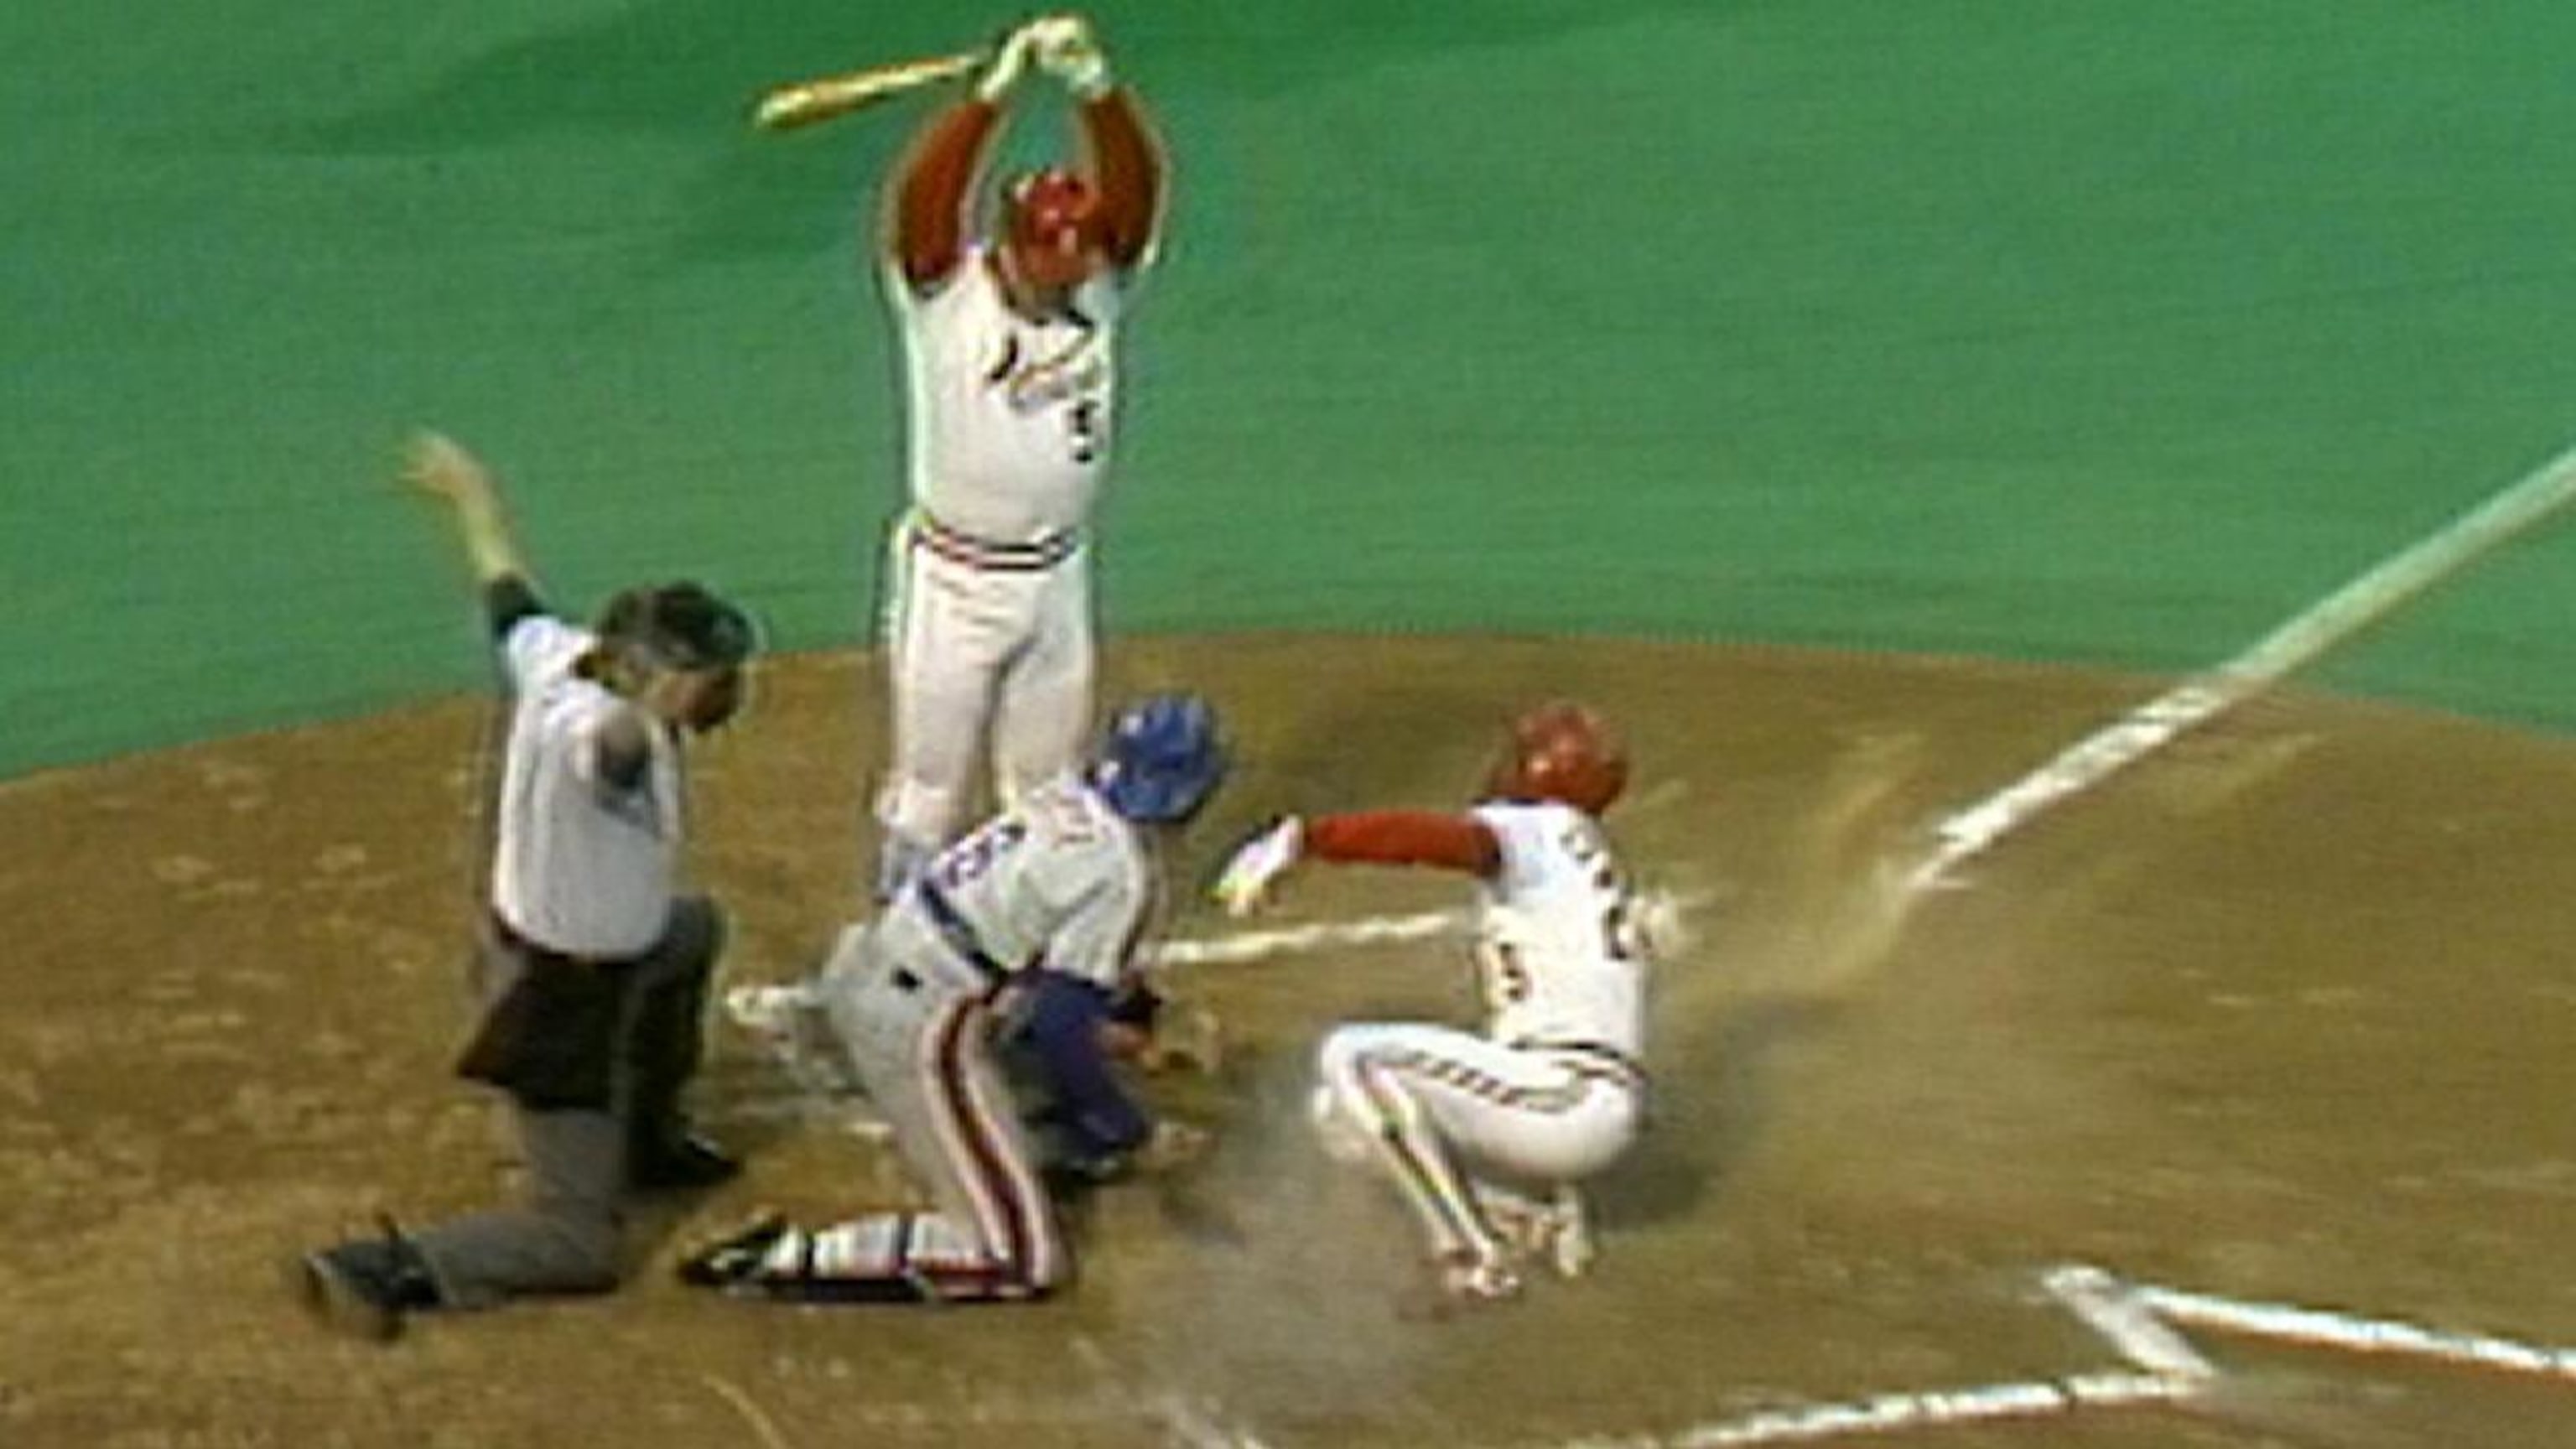 Vince Coleman was briefly MLB's most exciting player